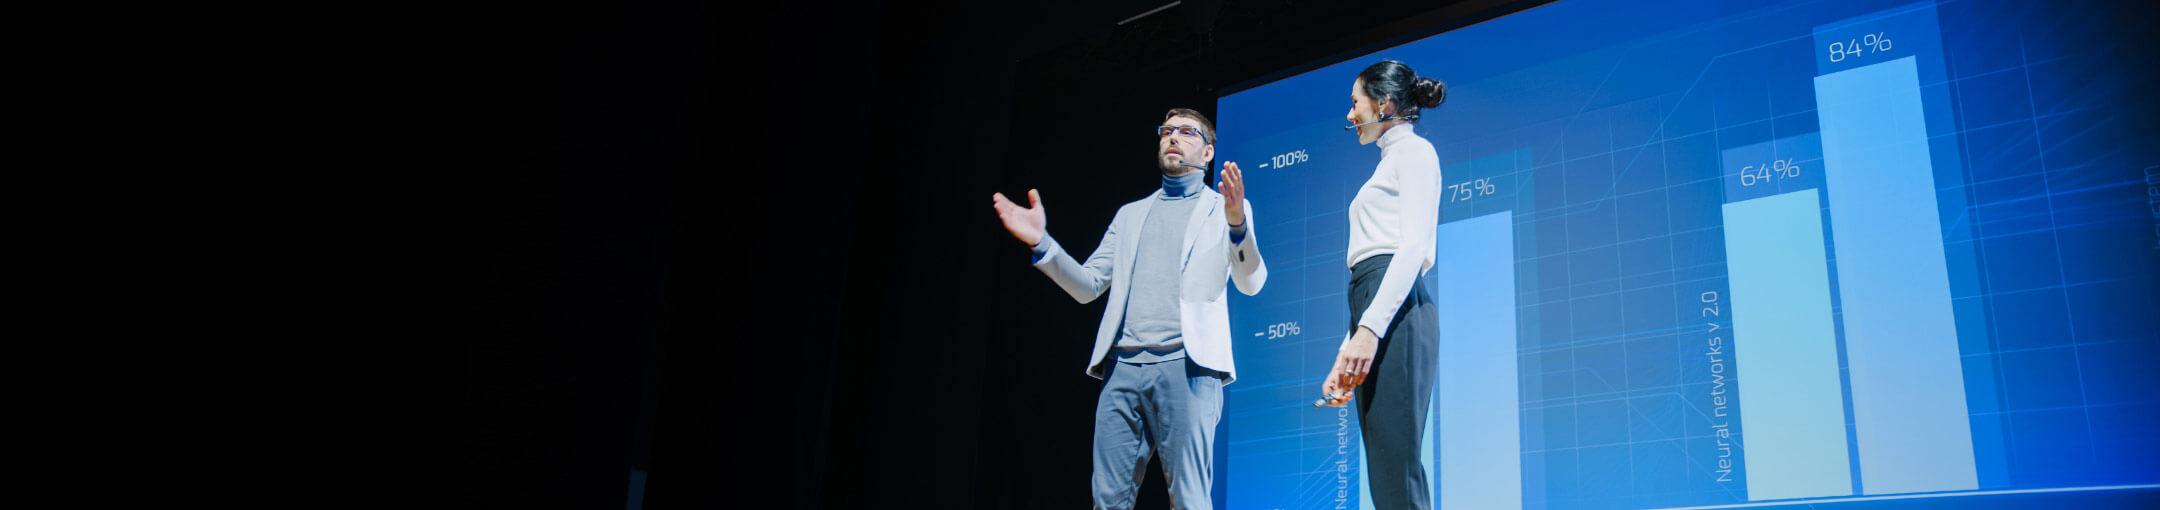 A man and woman stand on stage with charts projected behind them.